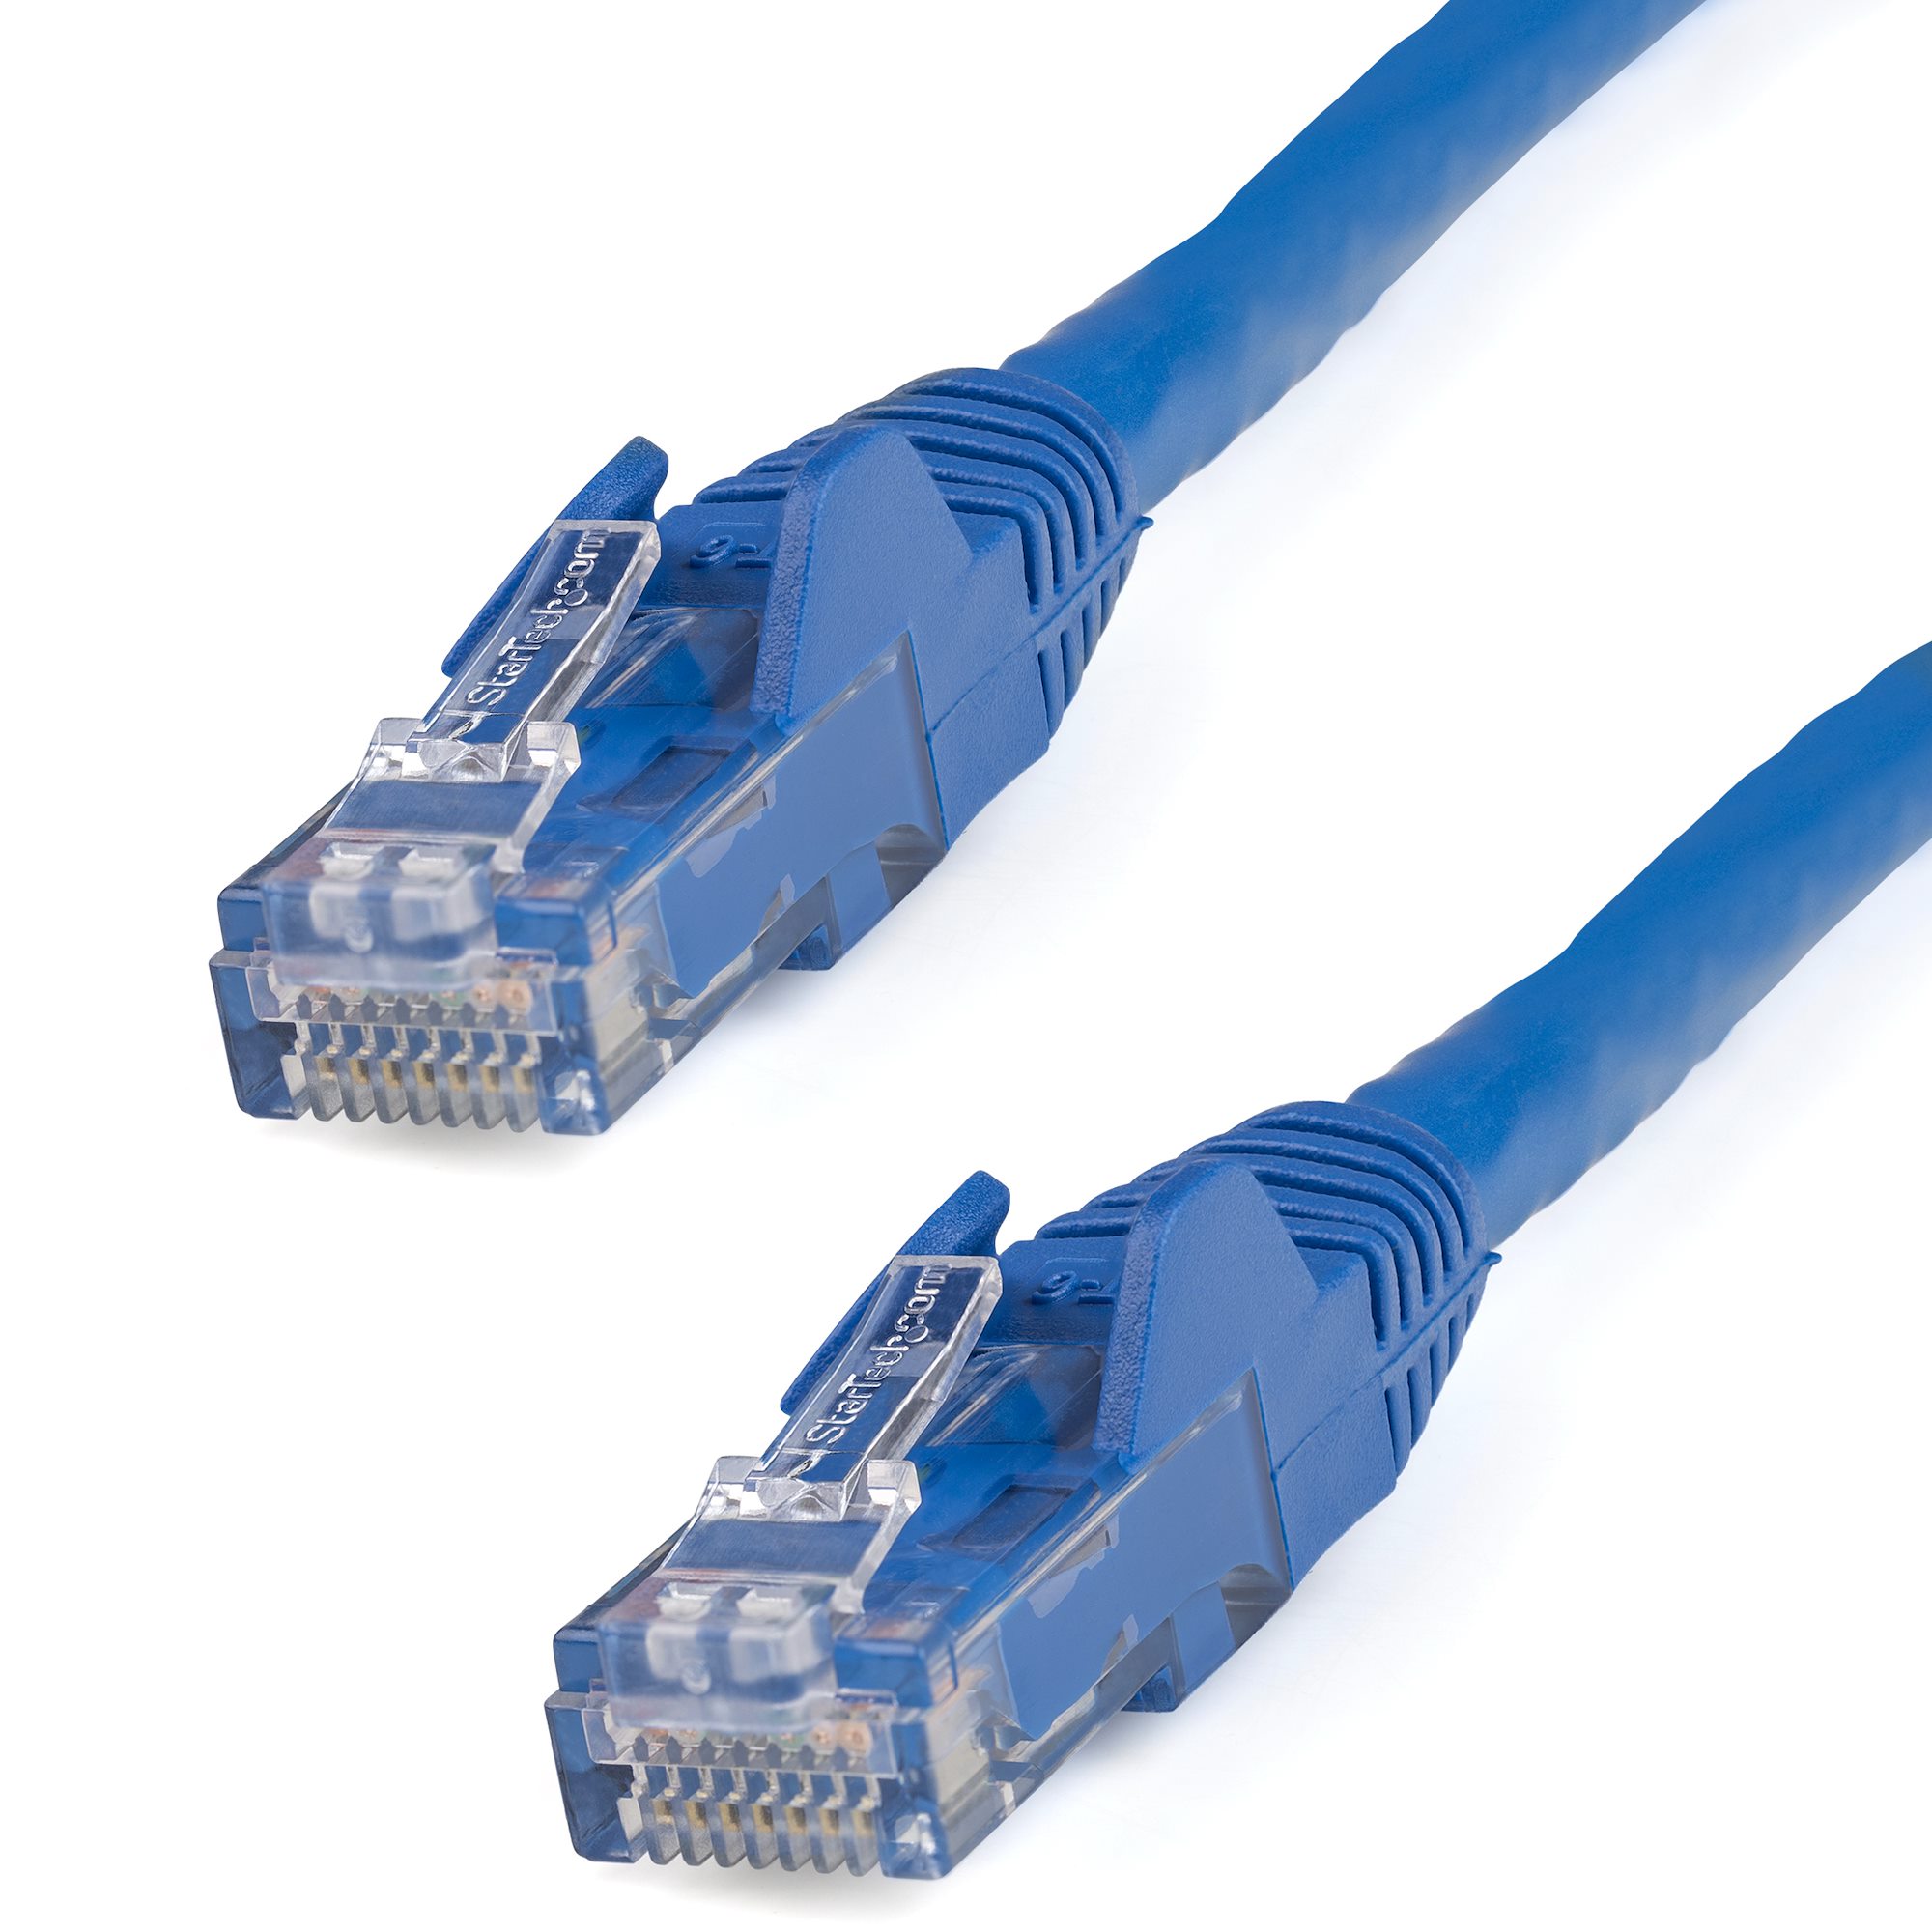 New RJ 45 Coupler for CAT5 CAT6 Ethernet Cable Extension UL Certified Qty 5 